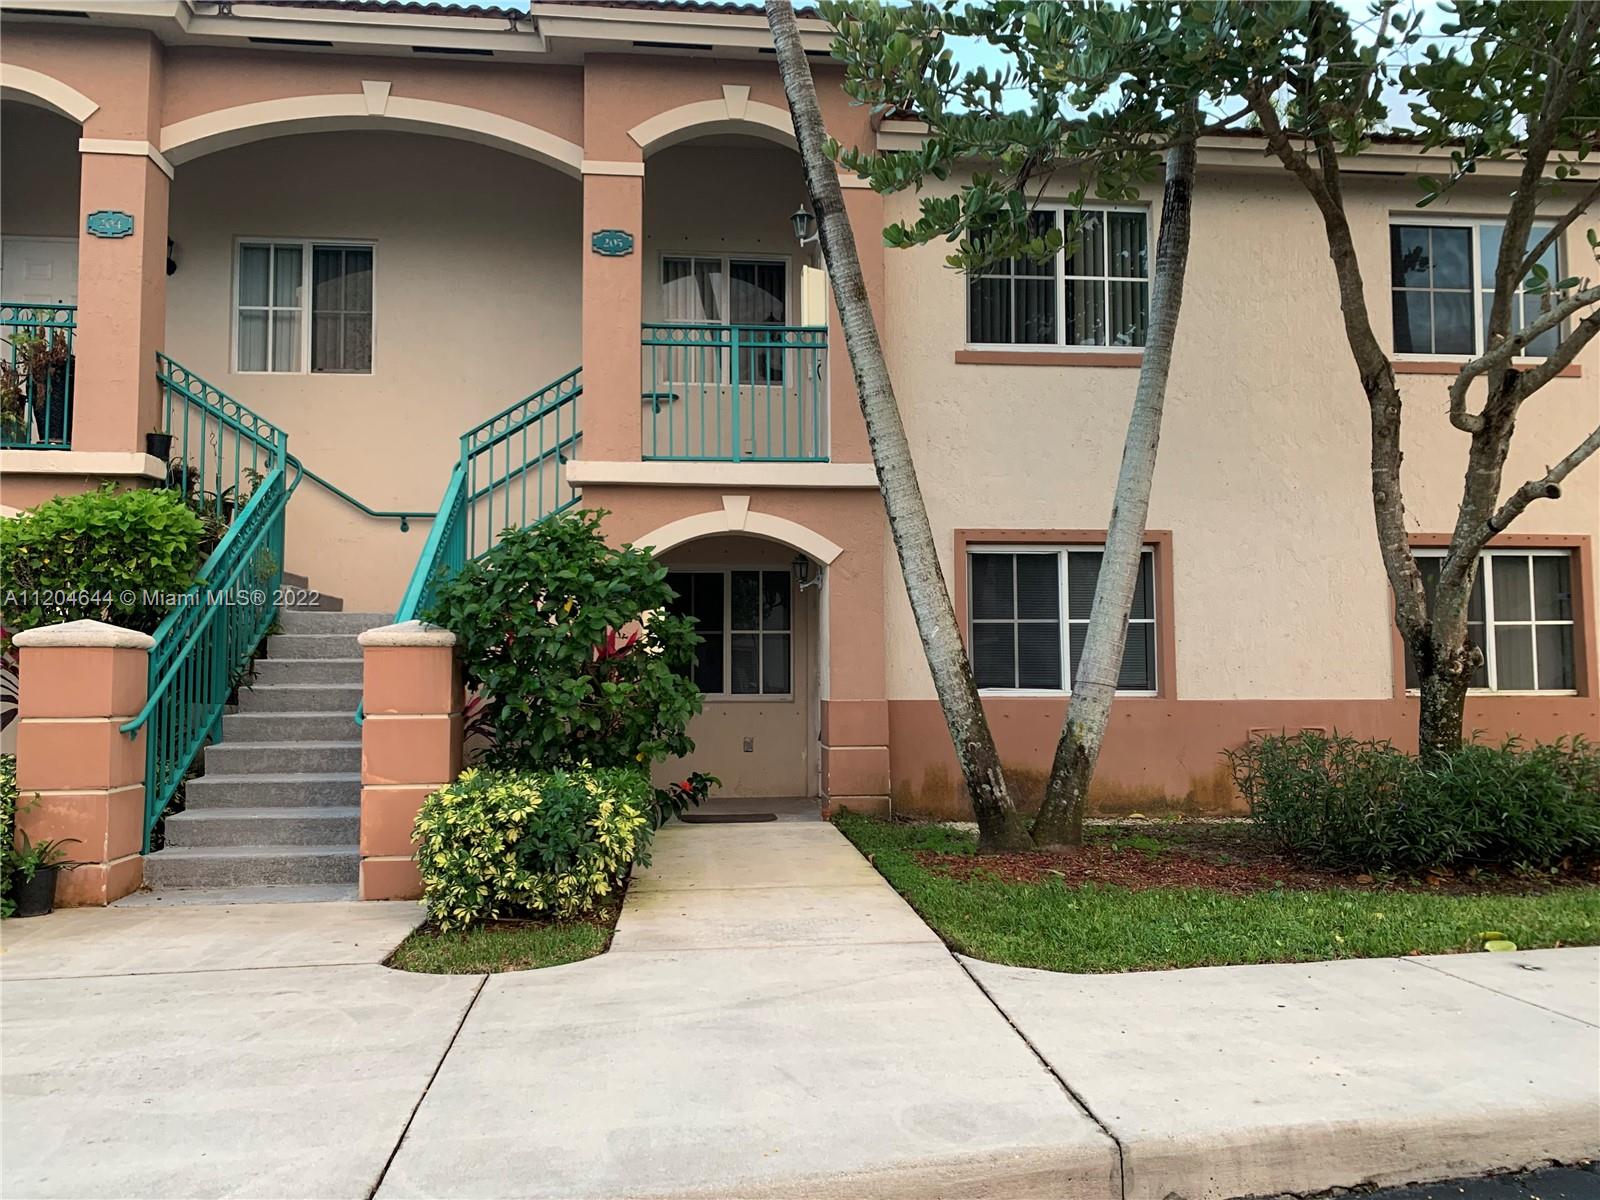 Lake view 2/2. Primary and secondary bedrooms have their own Walk-in closets. Good size storage closet outside. Gated community. Very well kept established neighborhood.